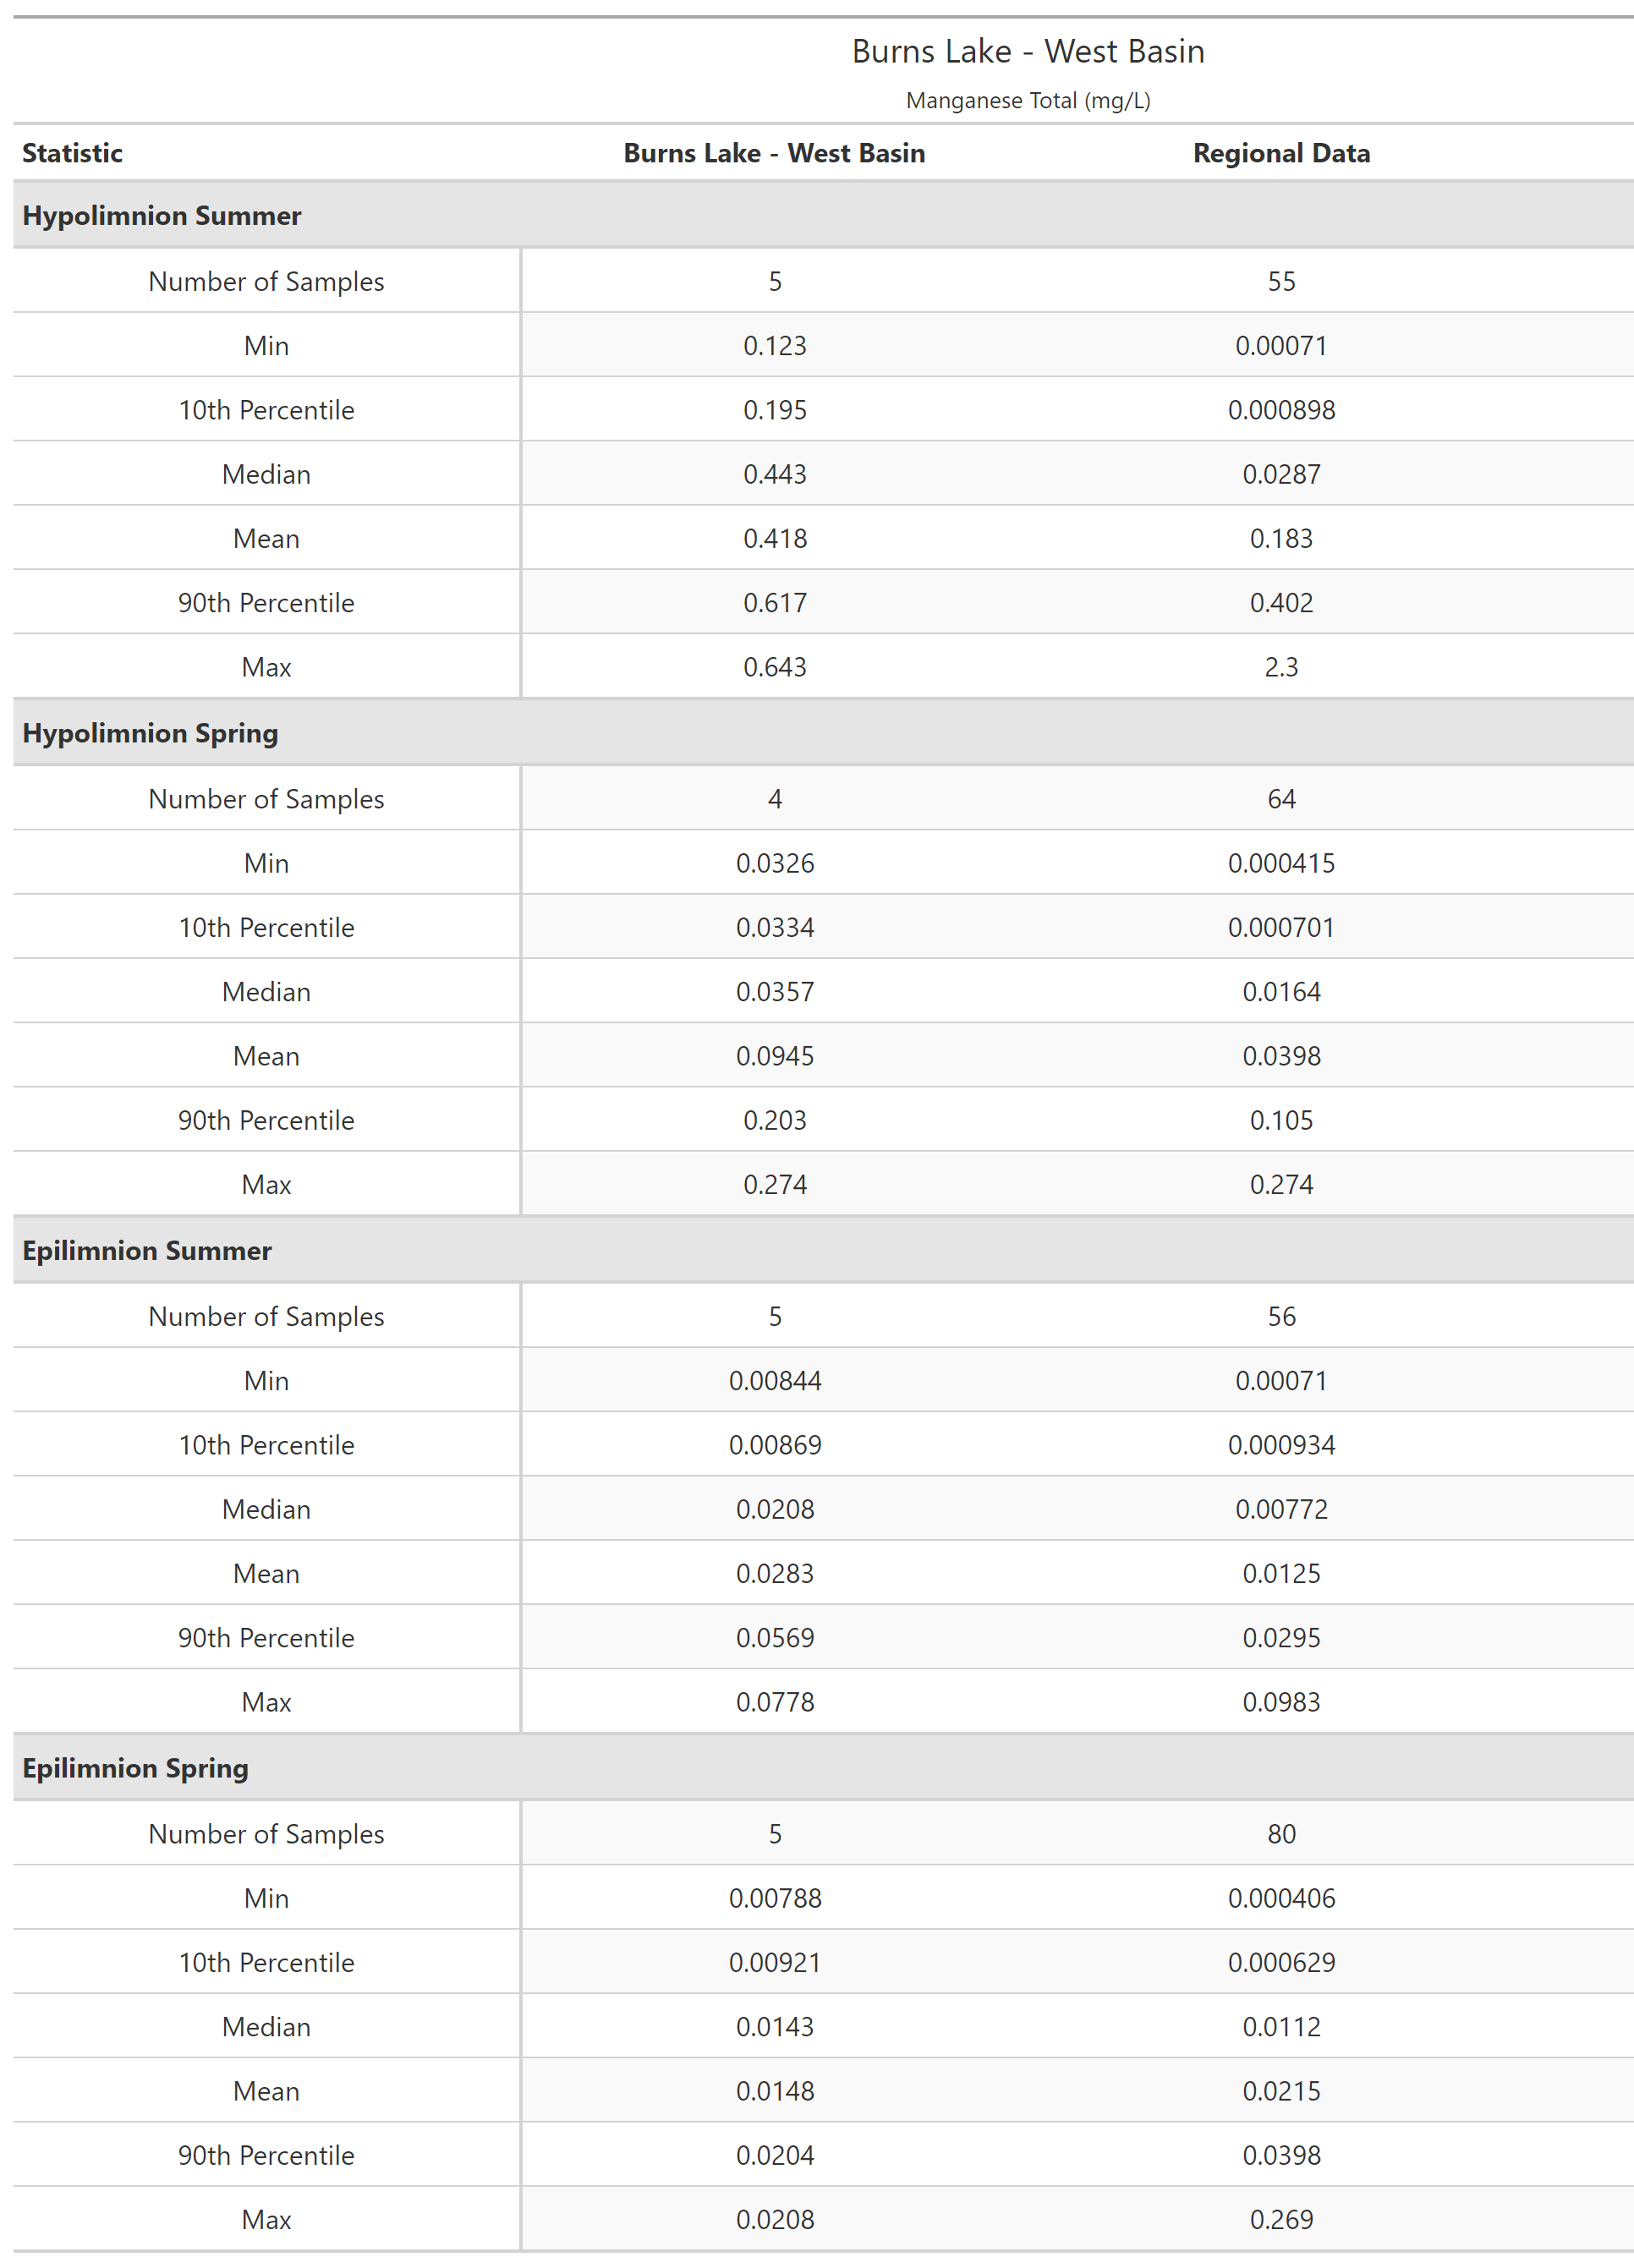 A table of summary statistics for Manganese Total with comparison to regional data